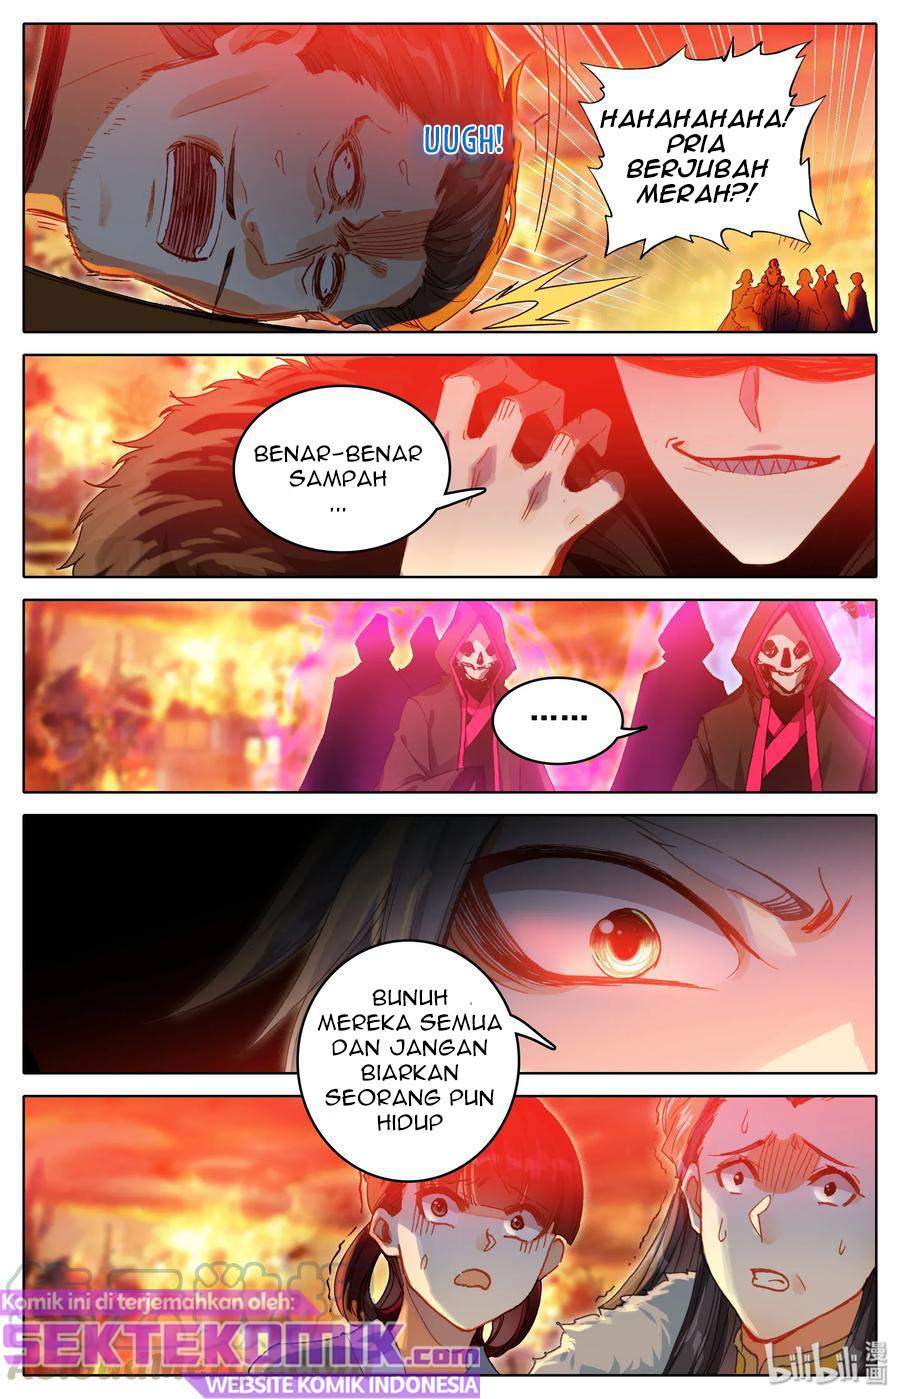 Mortal Cultivation Fairy World Chapter 14